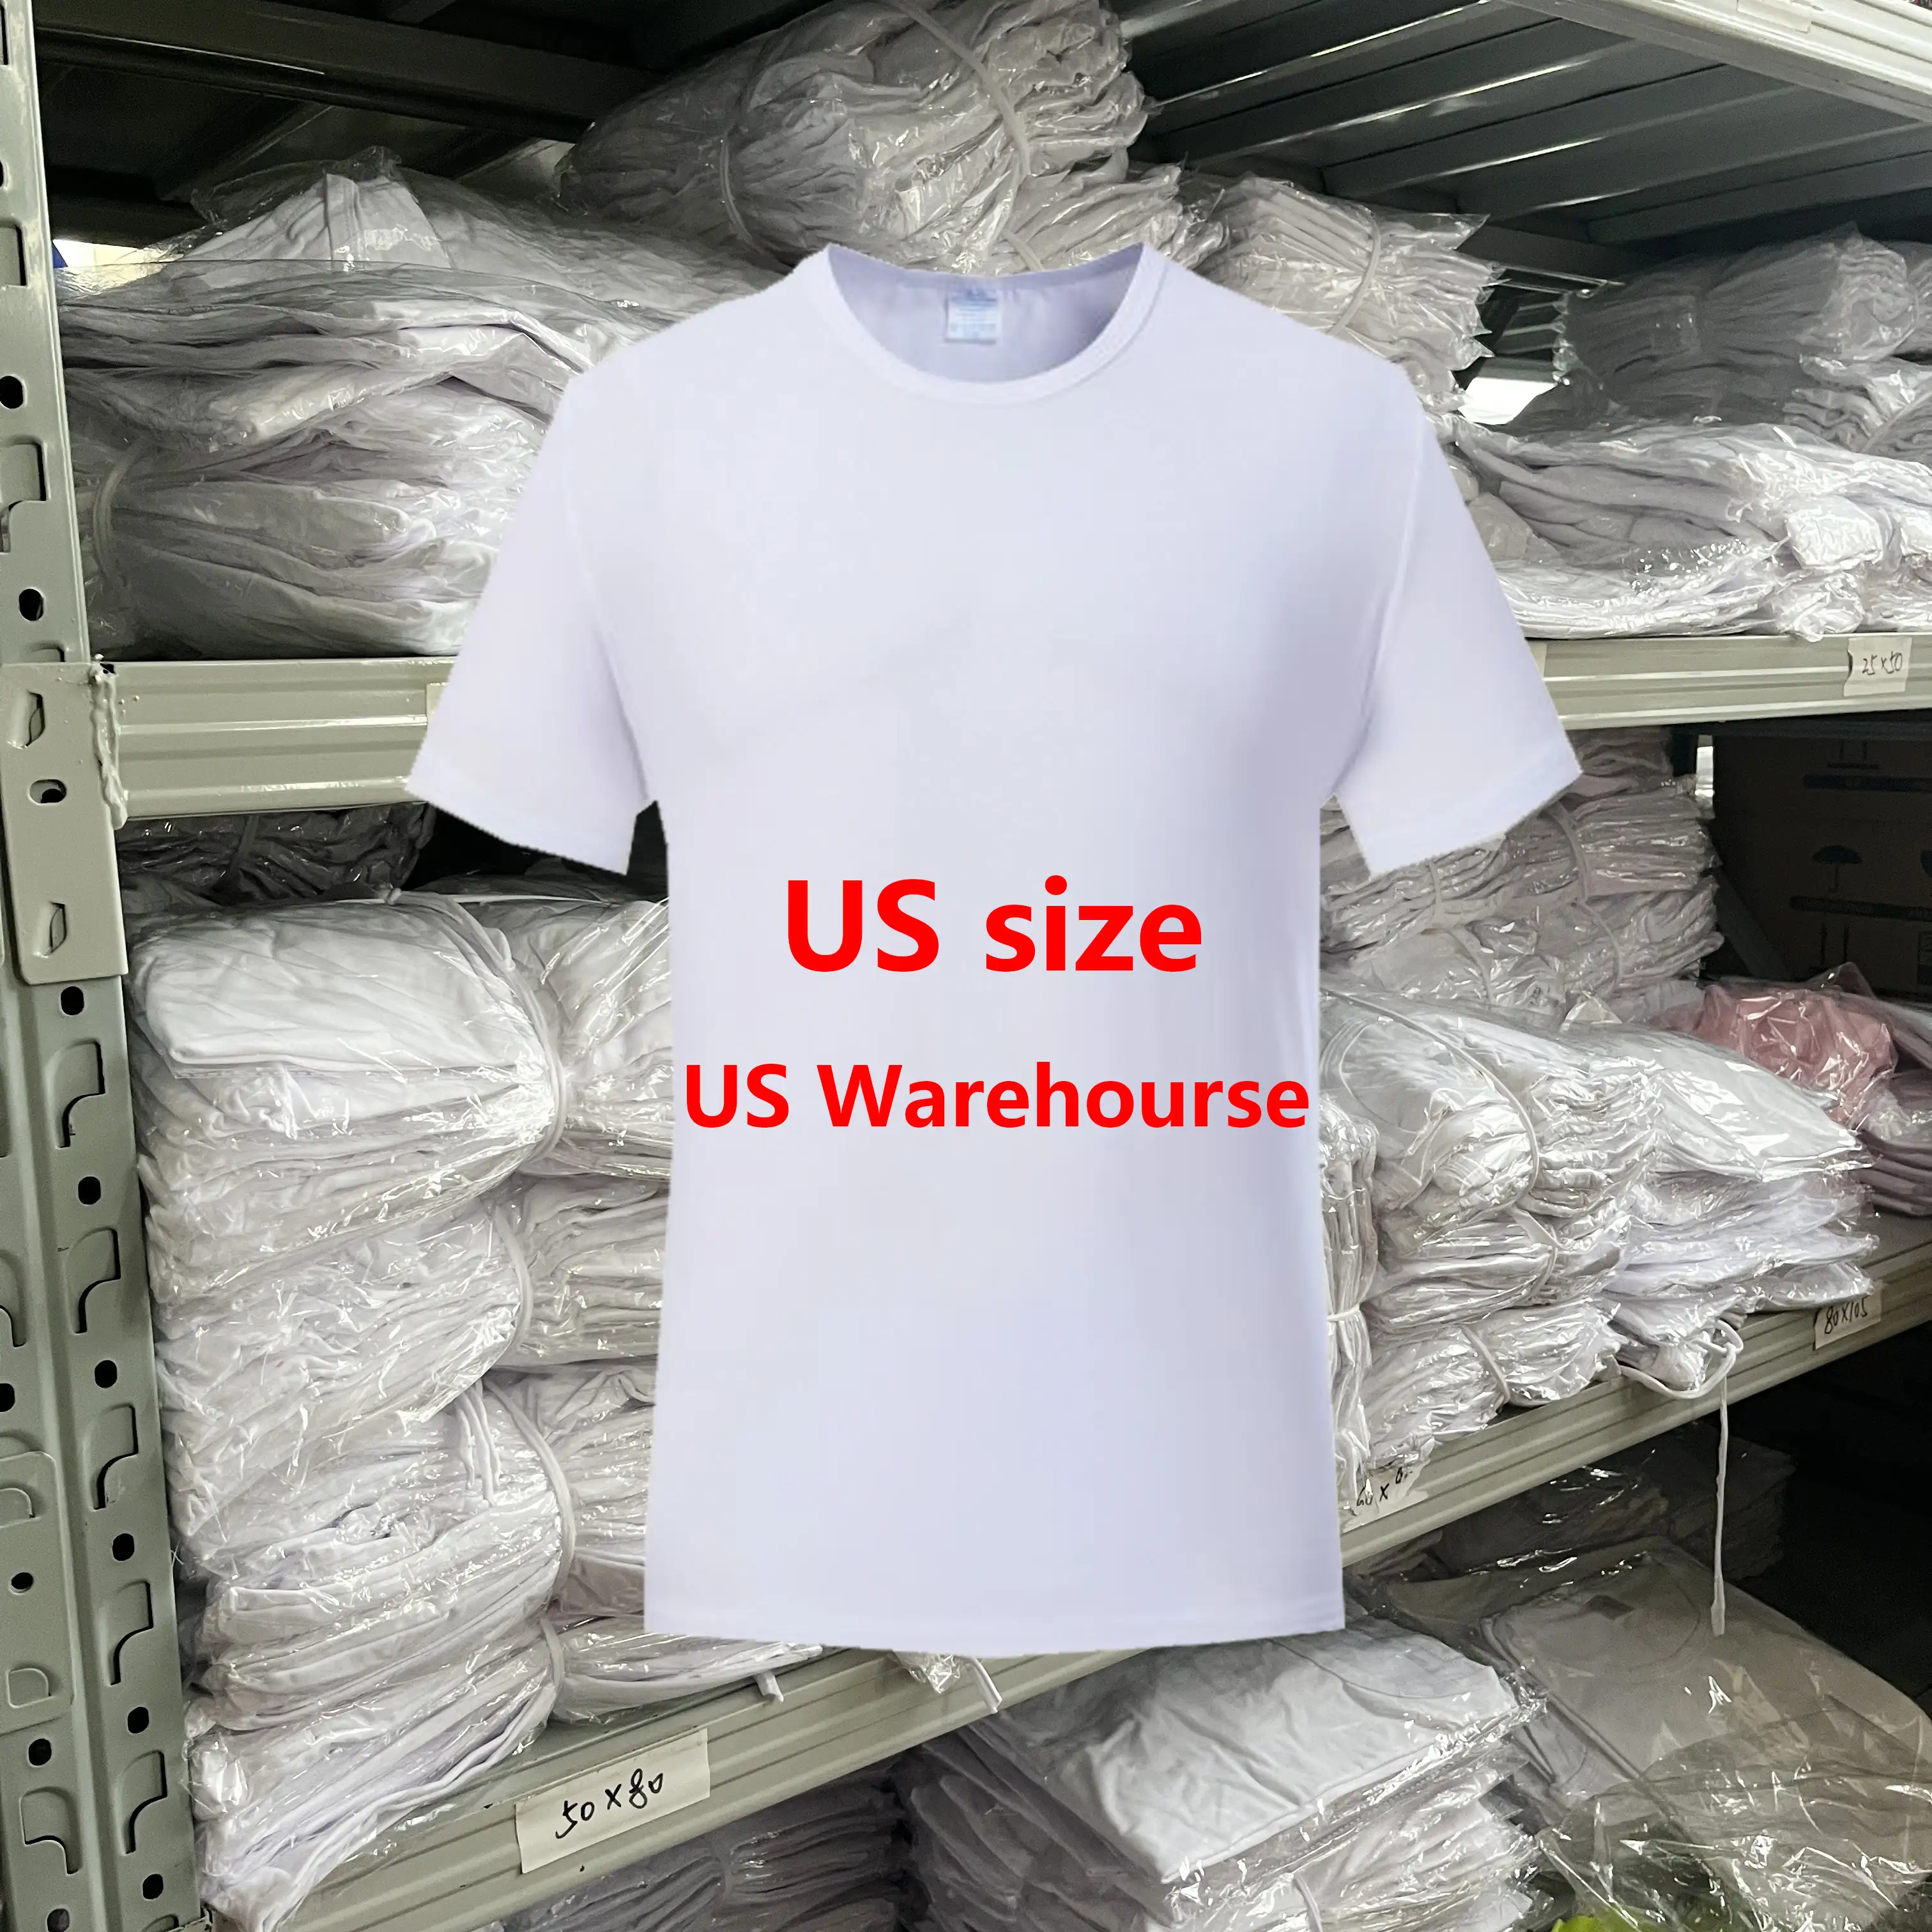 Shirts Cotton Tshirts T Satin Sublimation Shirts 100% Polyester Cotton Feel US Size Blank Polyester Tshirts Sublimation T Shirts Plain Custom Printing